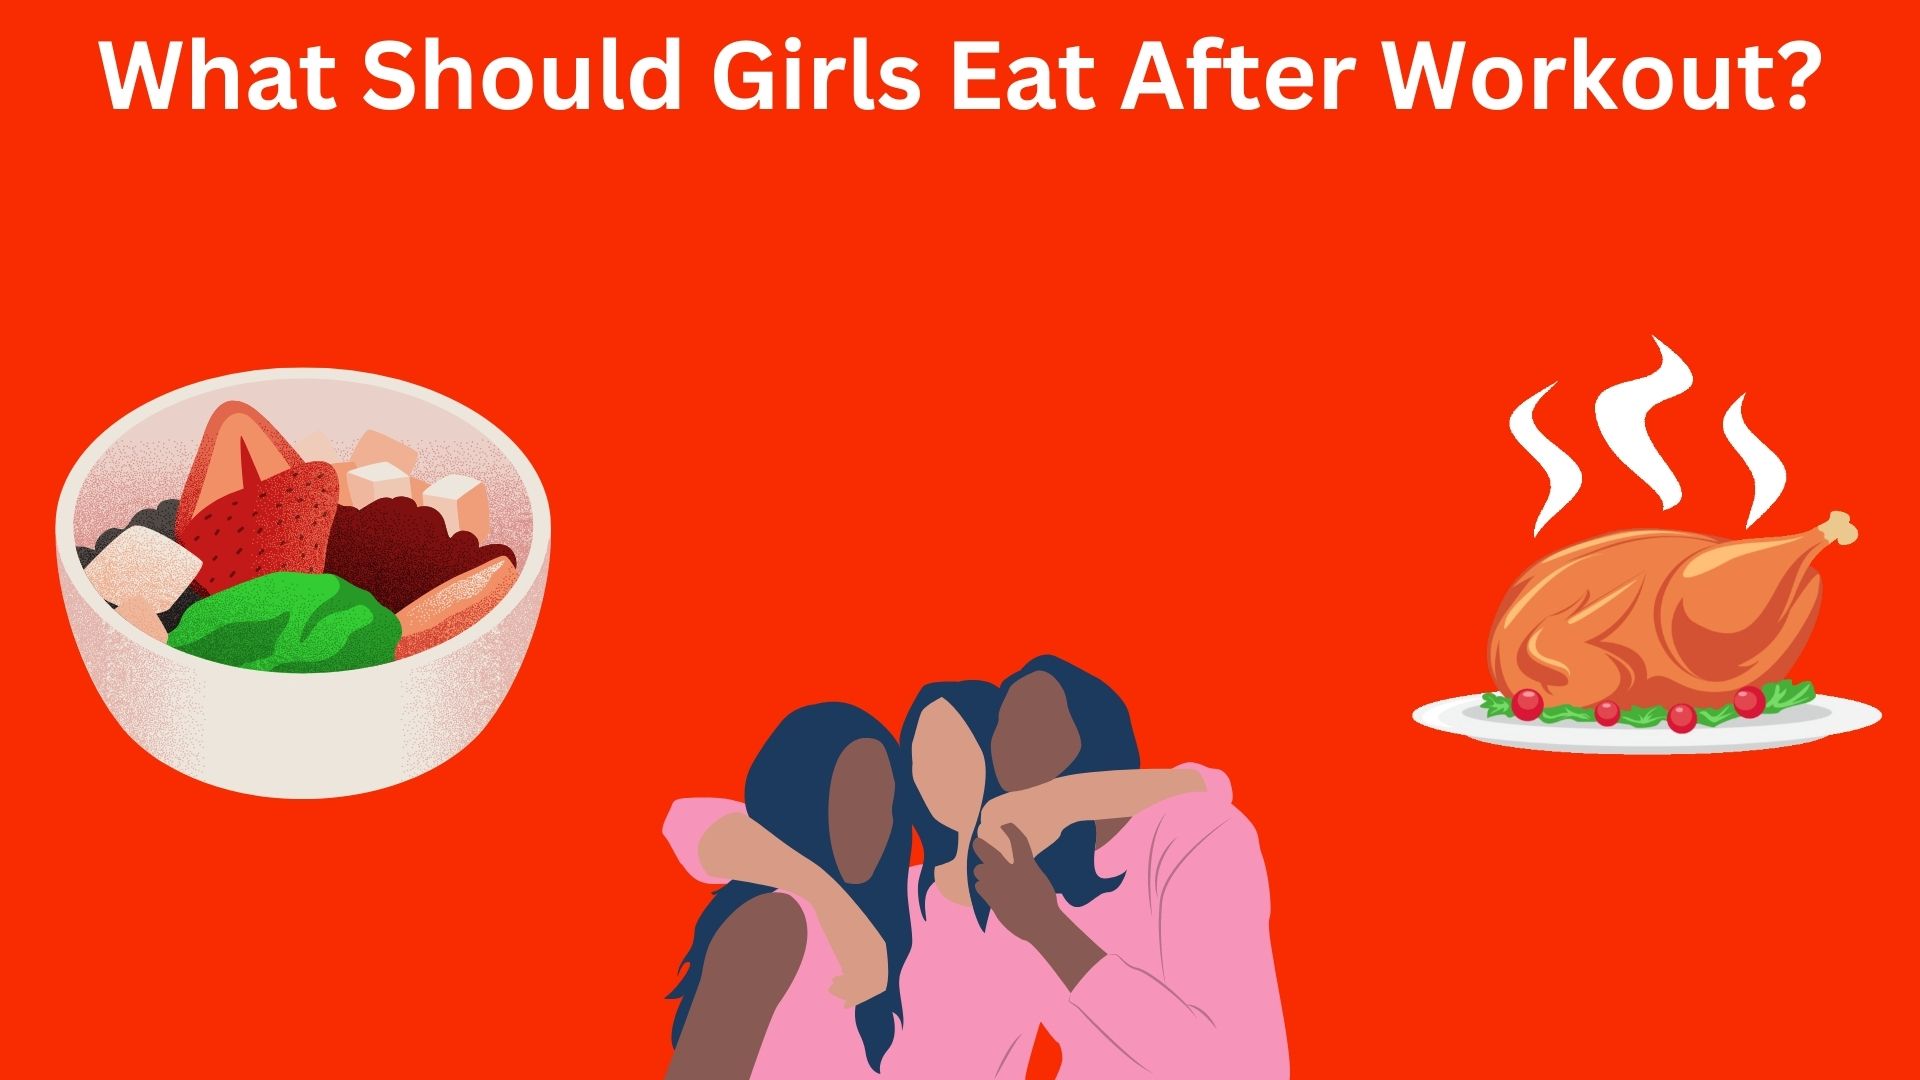 What Should Girls Eat After Workout